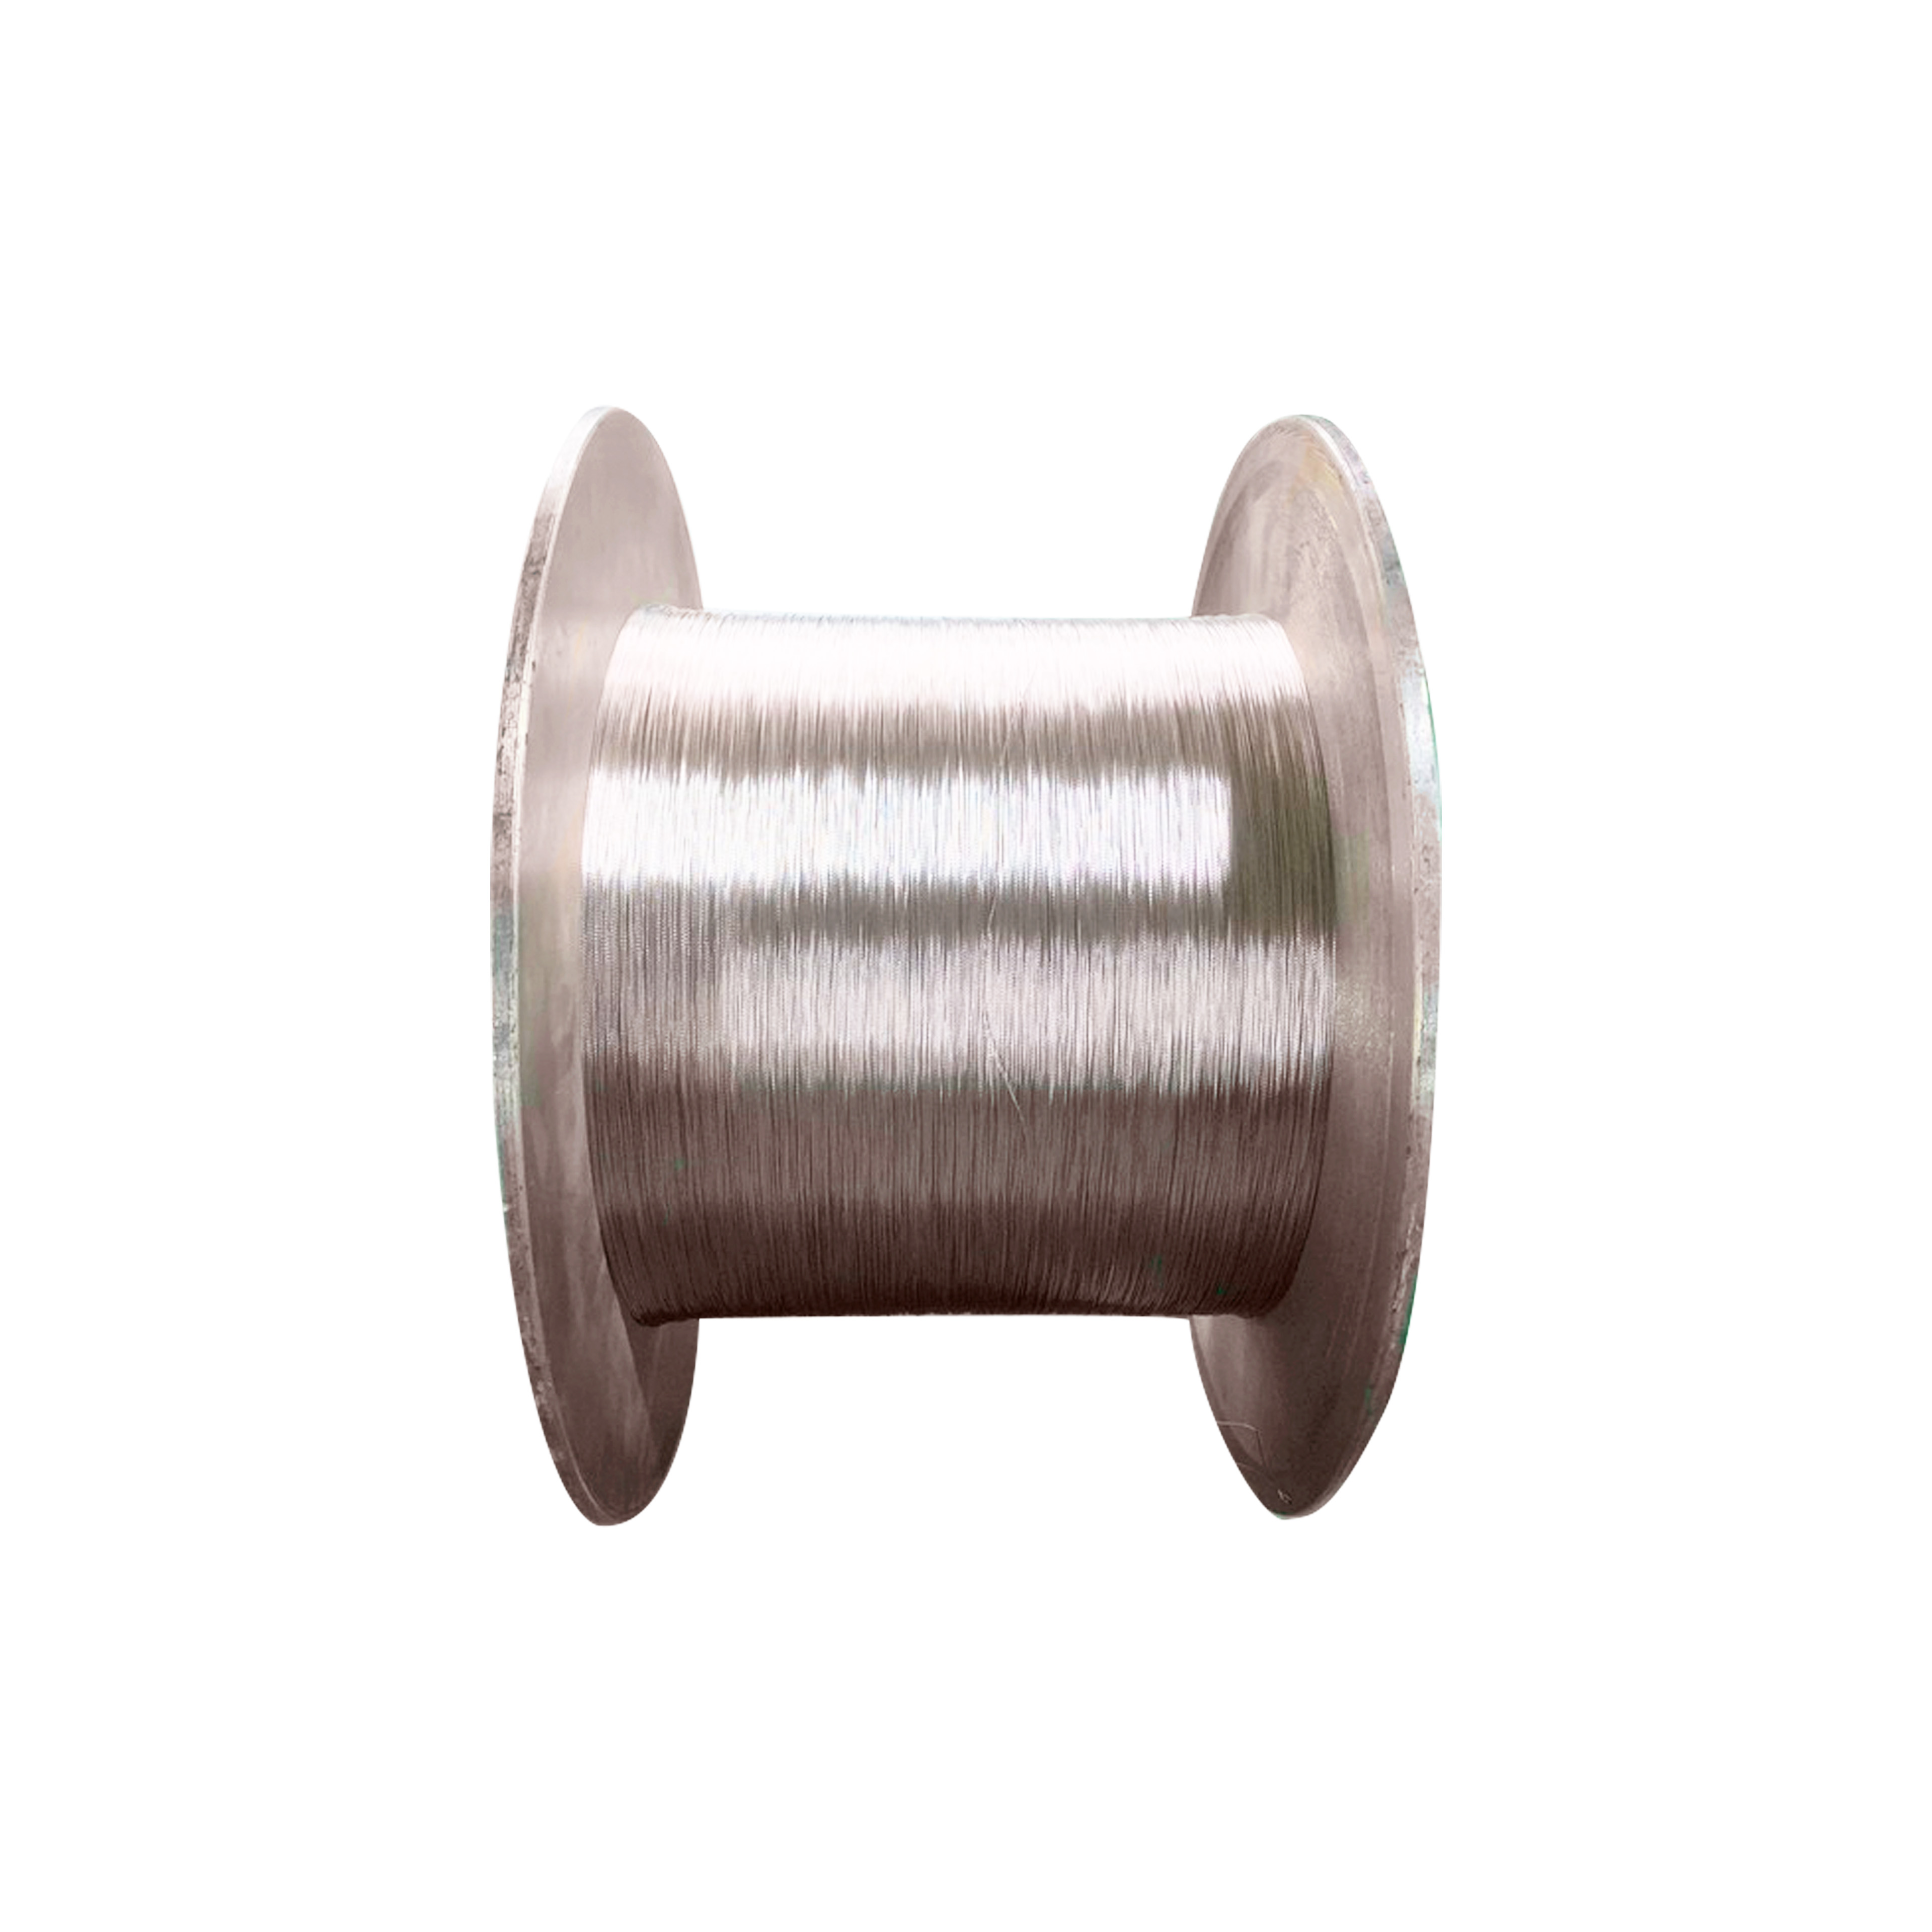 Wholesale Discount 41 Awg Silver Plated Copper Wire -
 High Conductivity Silver Plated Copper Wire For Transformer – Tianchuang